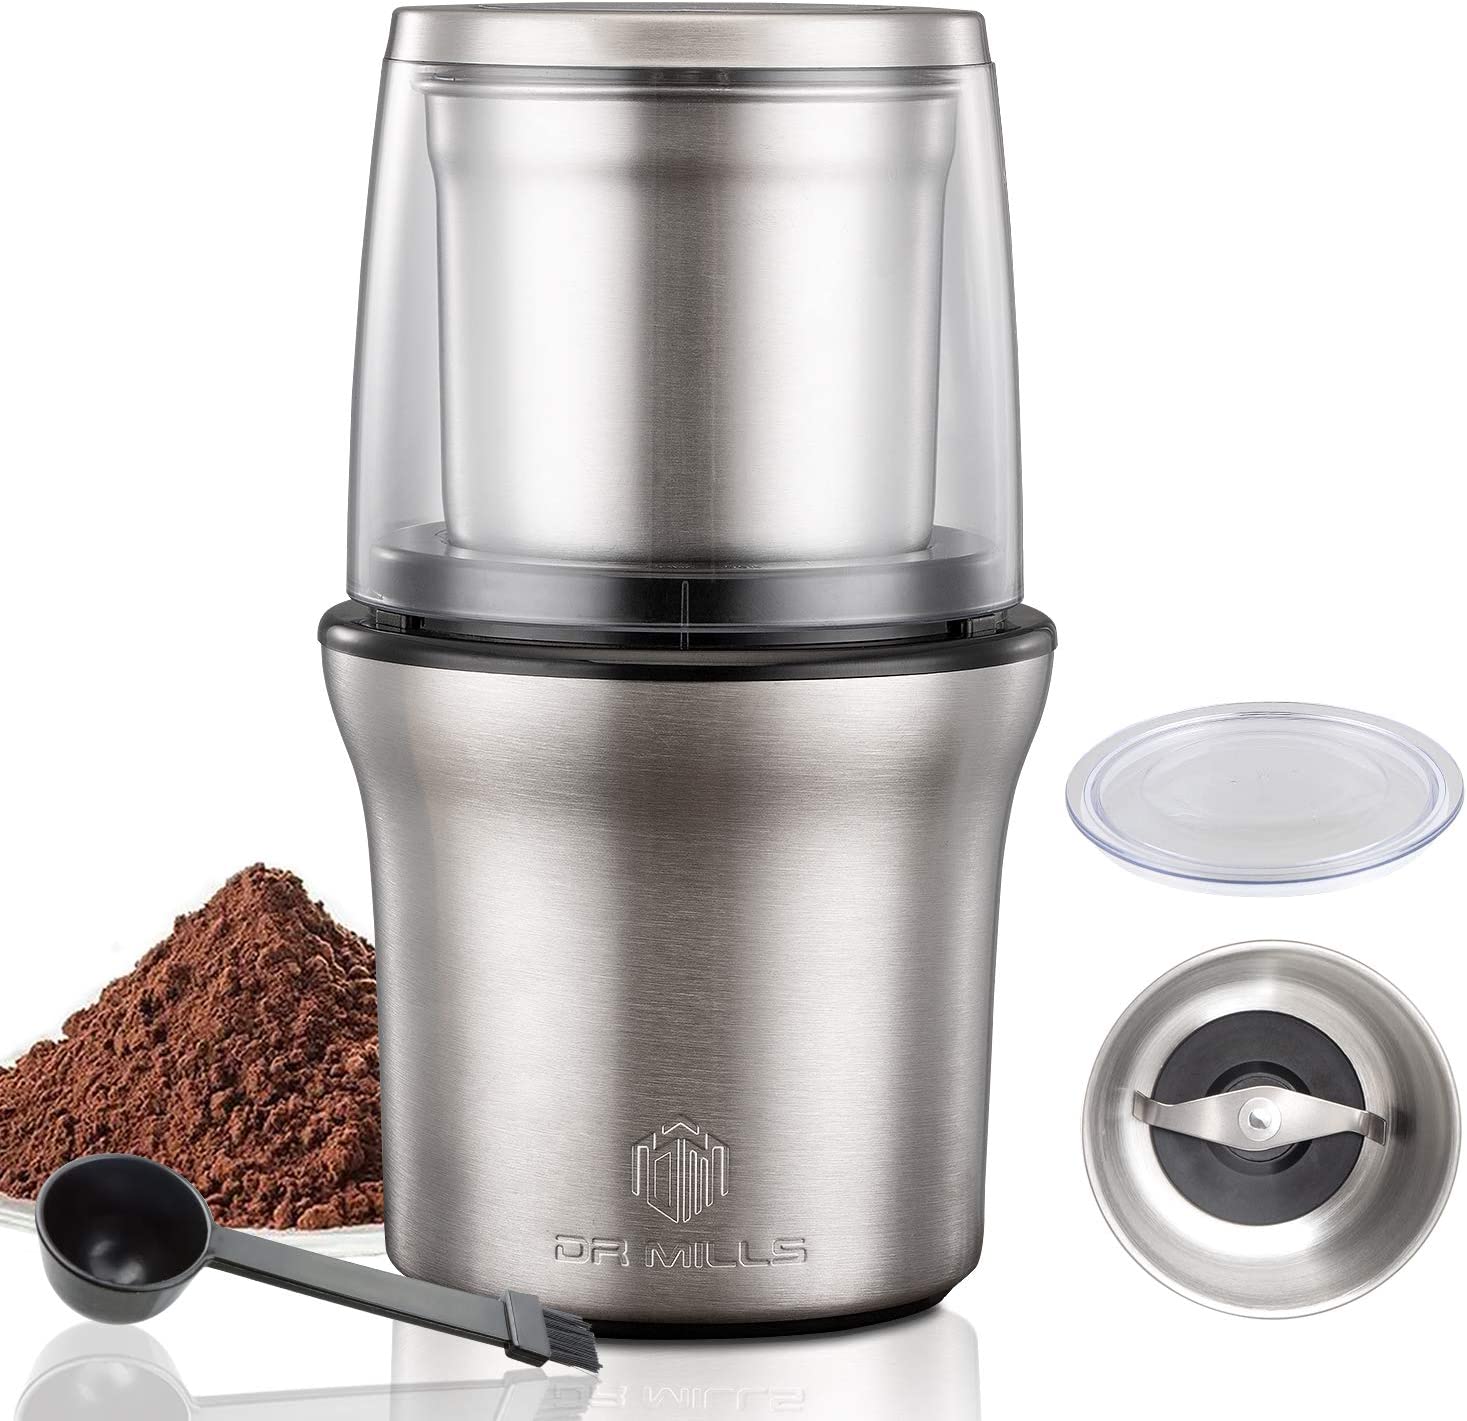 DR MILLS DM-7412N electric spice and coffee grinder, removable cup, wash-free knife and wash-free cup are made of SUS304 stainless steel